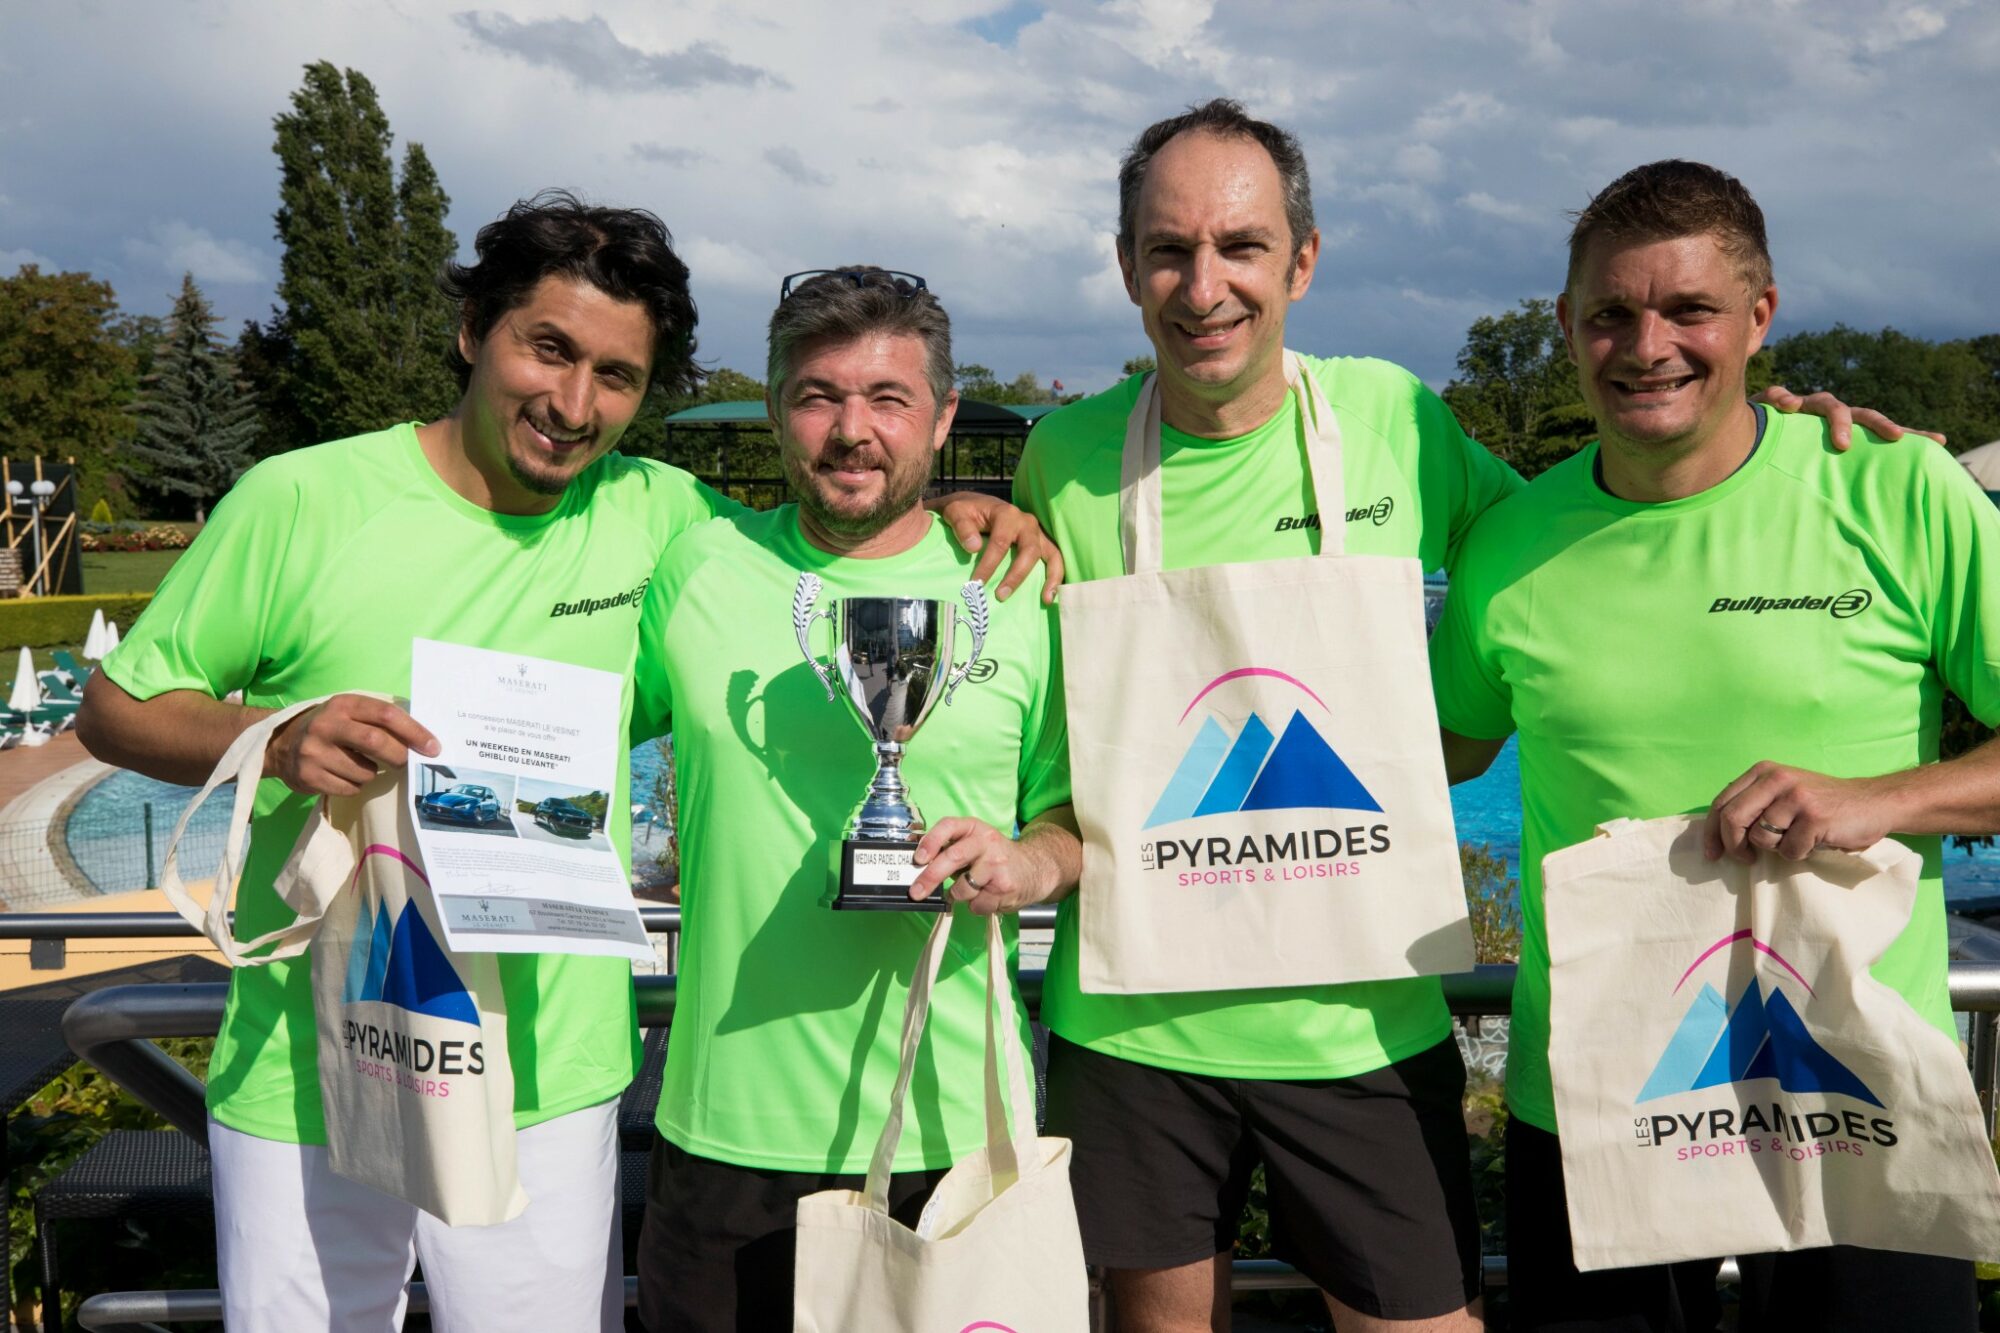 The FFT wins the Media Padel Challenge 2019